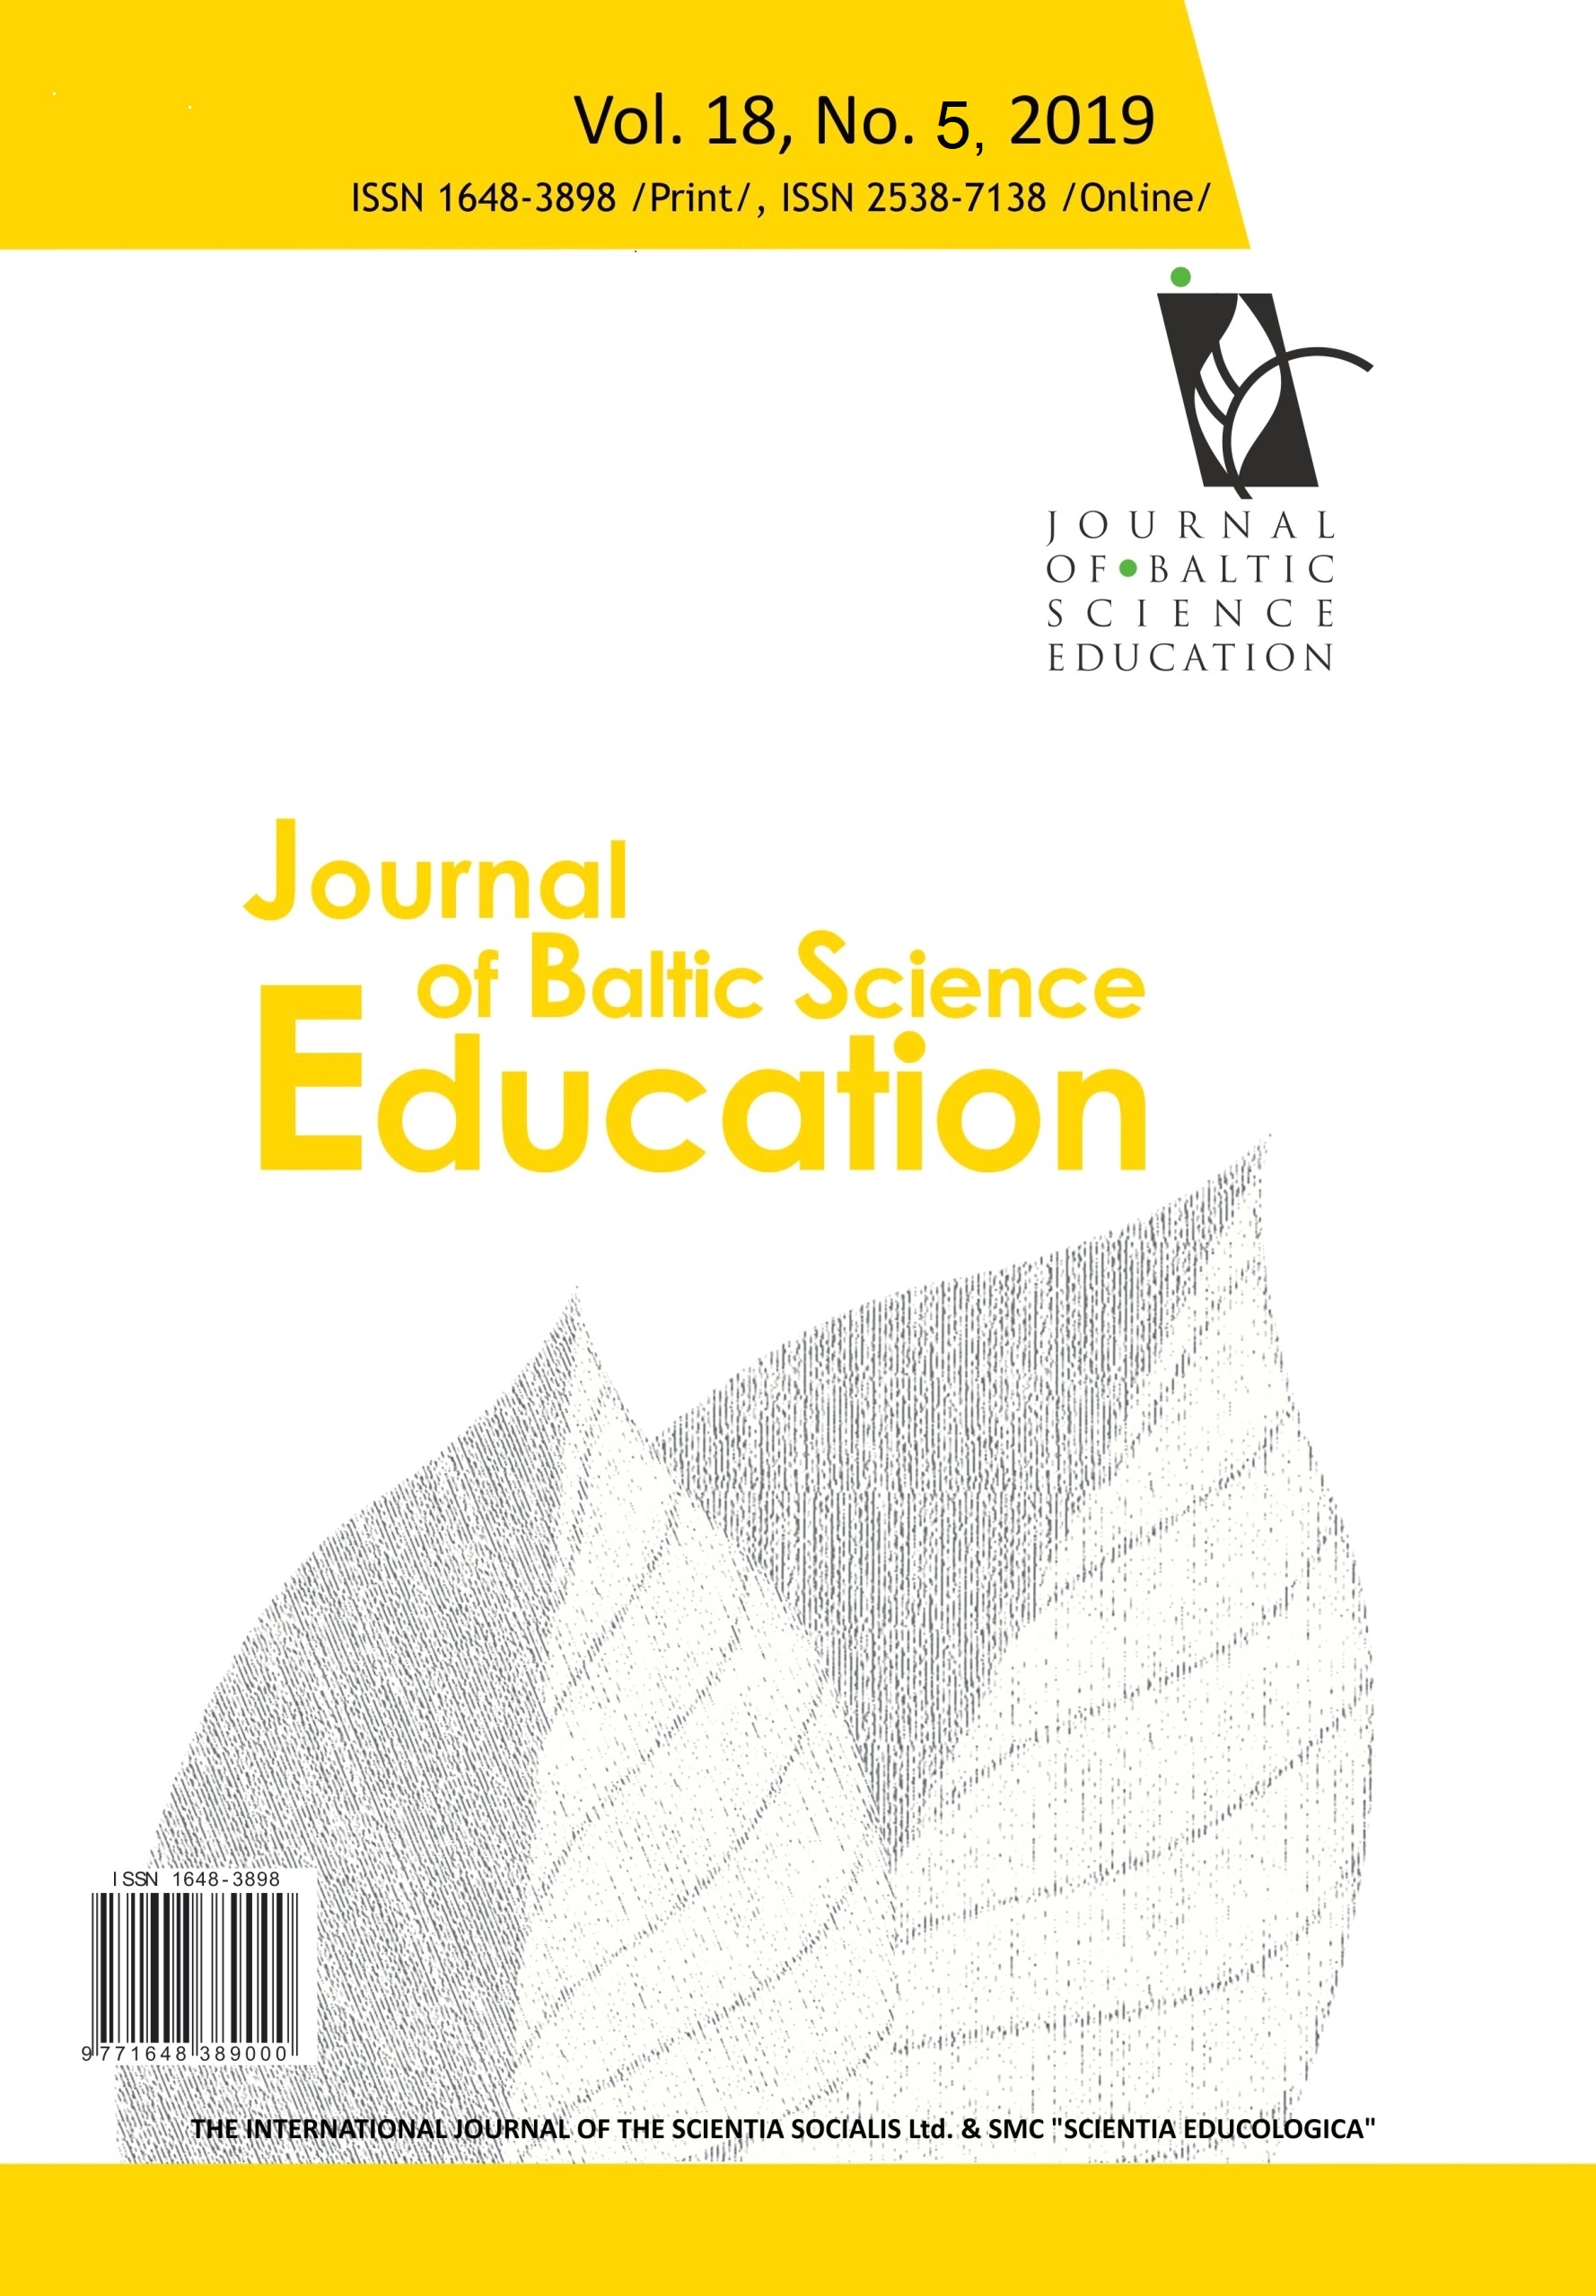 THE INFLUENCE OF SELECTED VARIABLES ON LOWER SECONDARY SCHOOL STUDENTS’ CONCEPTS ABOUT DISEASES Cover Image